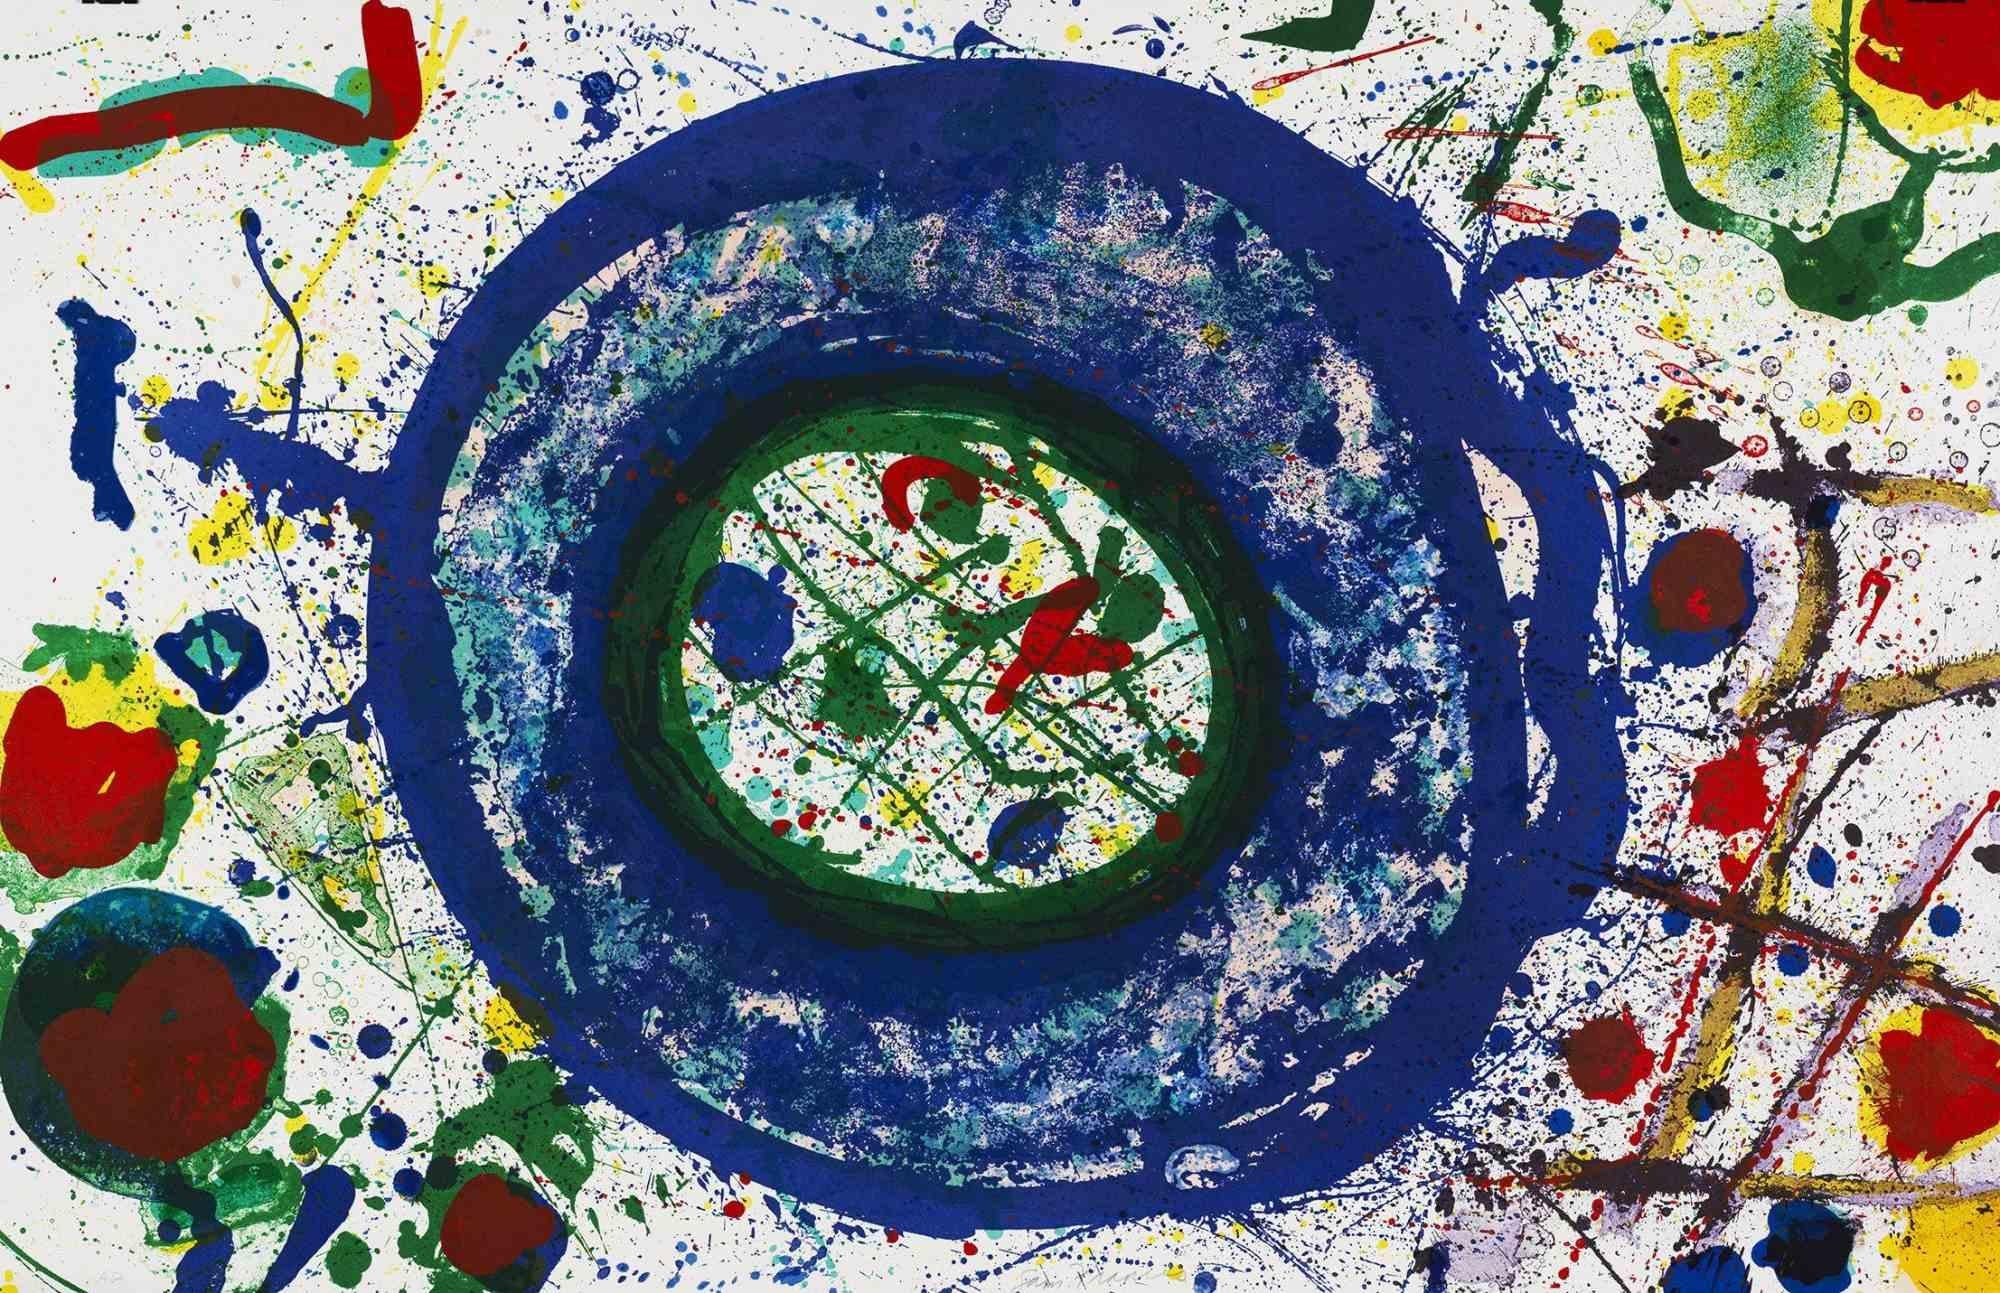 Untitled is an original artwork realized by Sam Francis in 1992.

Mixed colored lithograph on velin paper.

Hand signed on the lower margin. Artist's proof, aside of the numbered edition of 50.

The Litho Shop publisher and printer, Santa Monica,